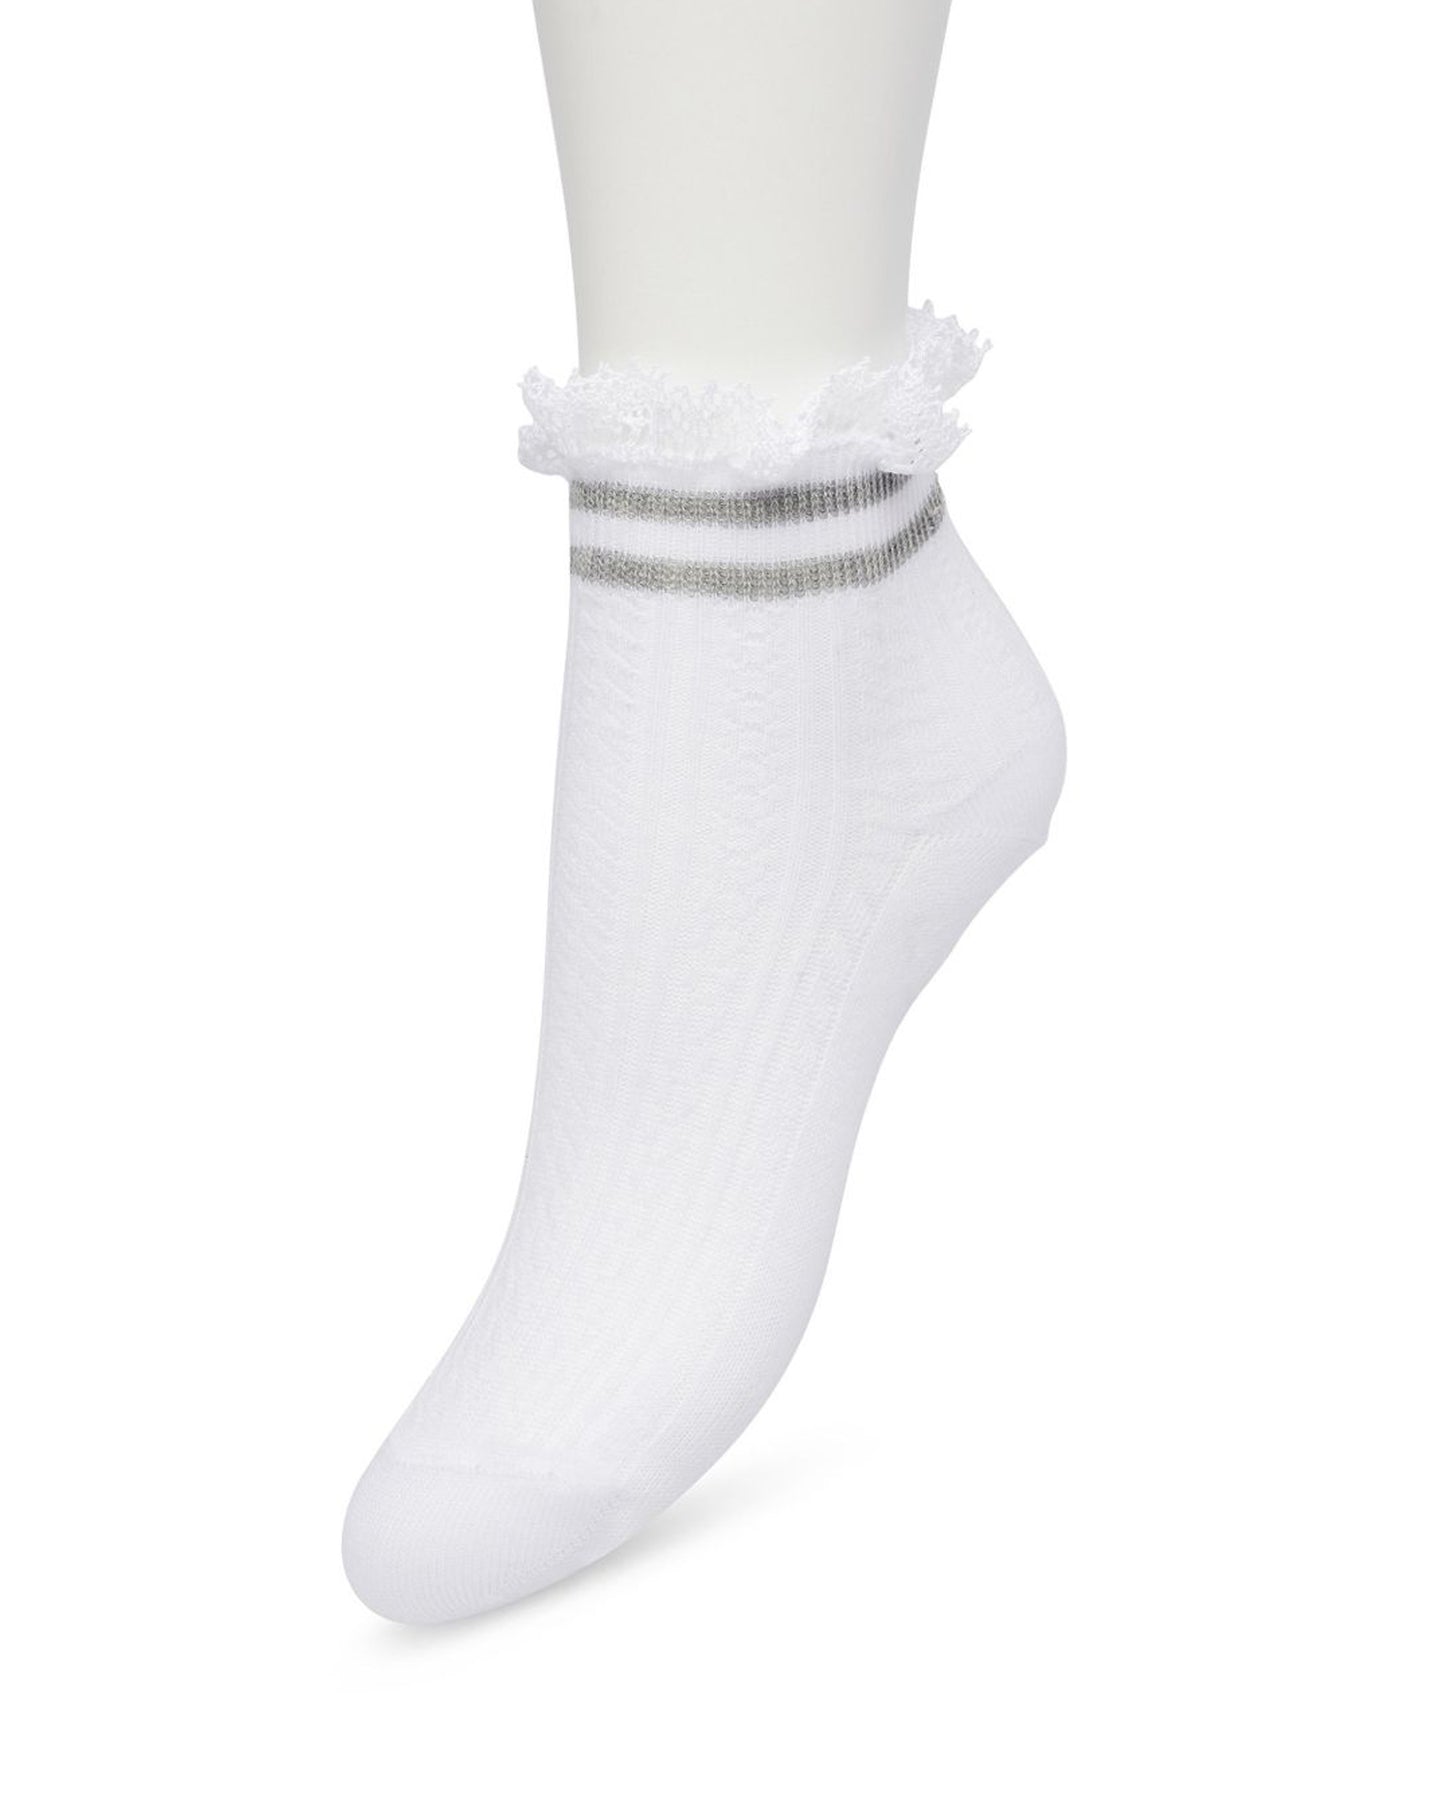 Bonnie Doon Sporty Lace Sock - Light weight white cable knitted style low ankle socks with a lace frill cuff with grey double sports stripe, shaped heel and flat toe seam.